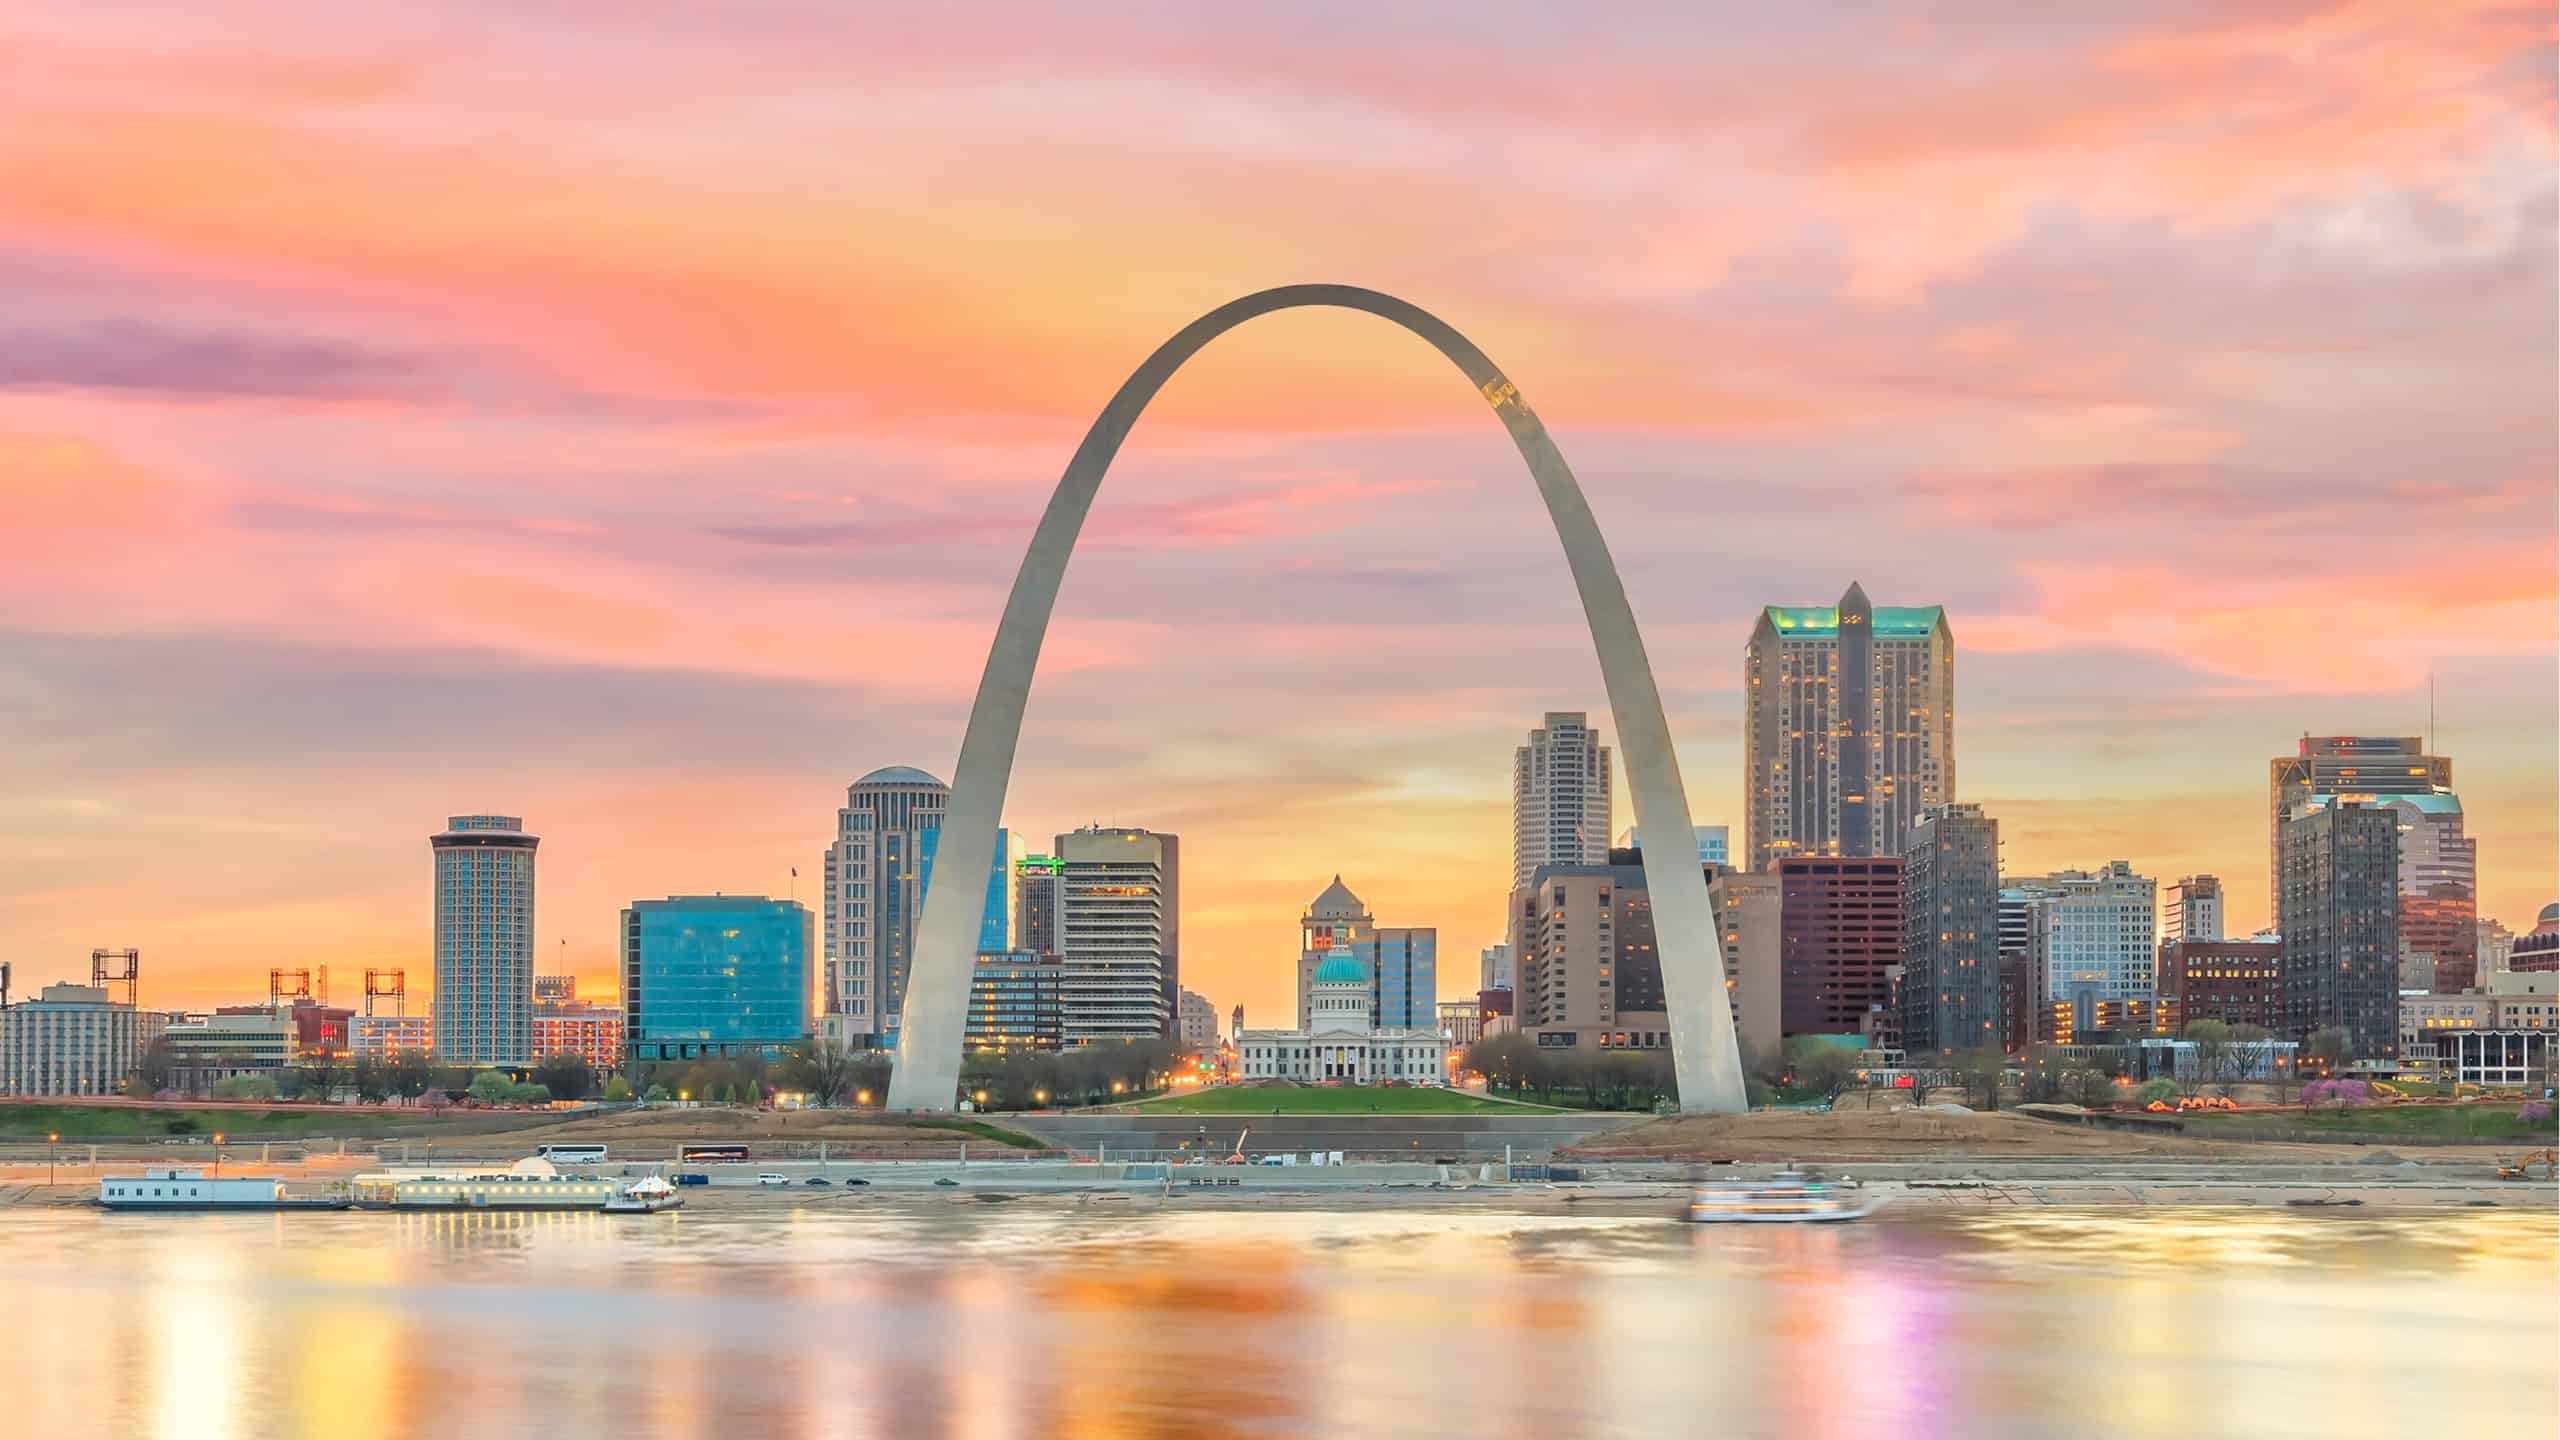 Gateway Arch Guide in St. Louis Missouri Places.Travel